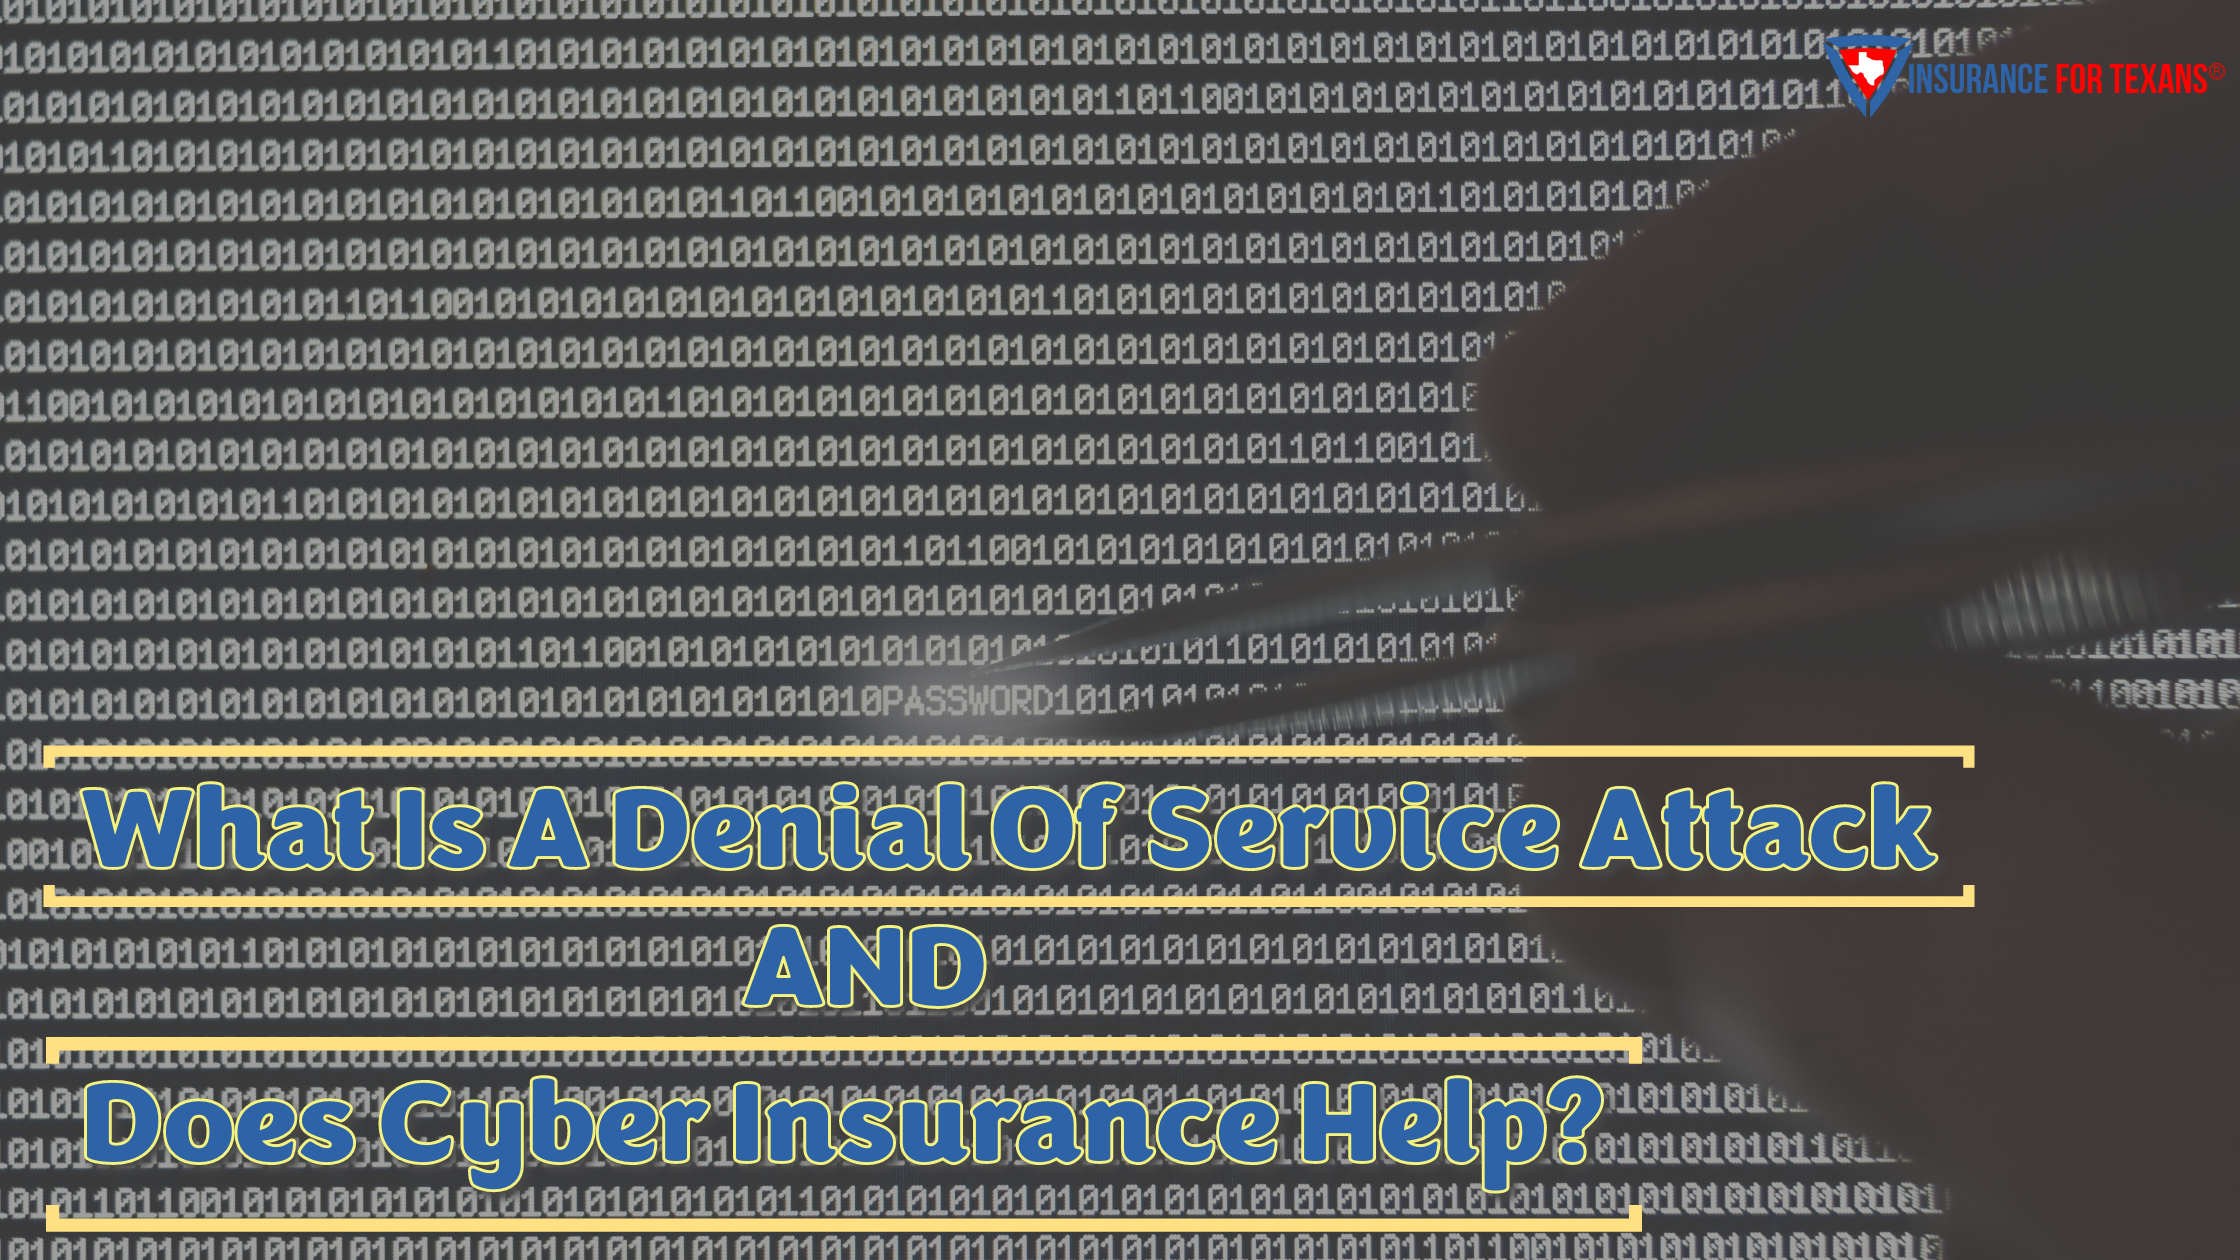  What is a Denial of Service Attack & Does Cyber Insurance Help?